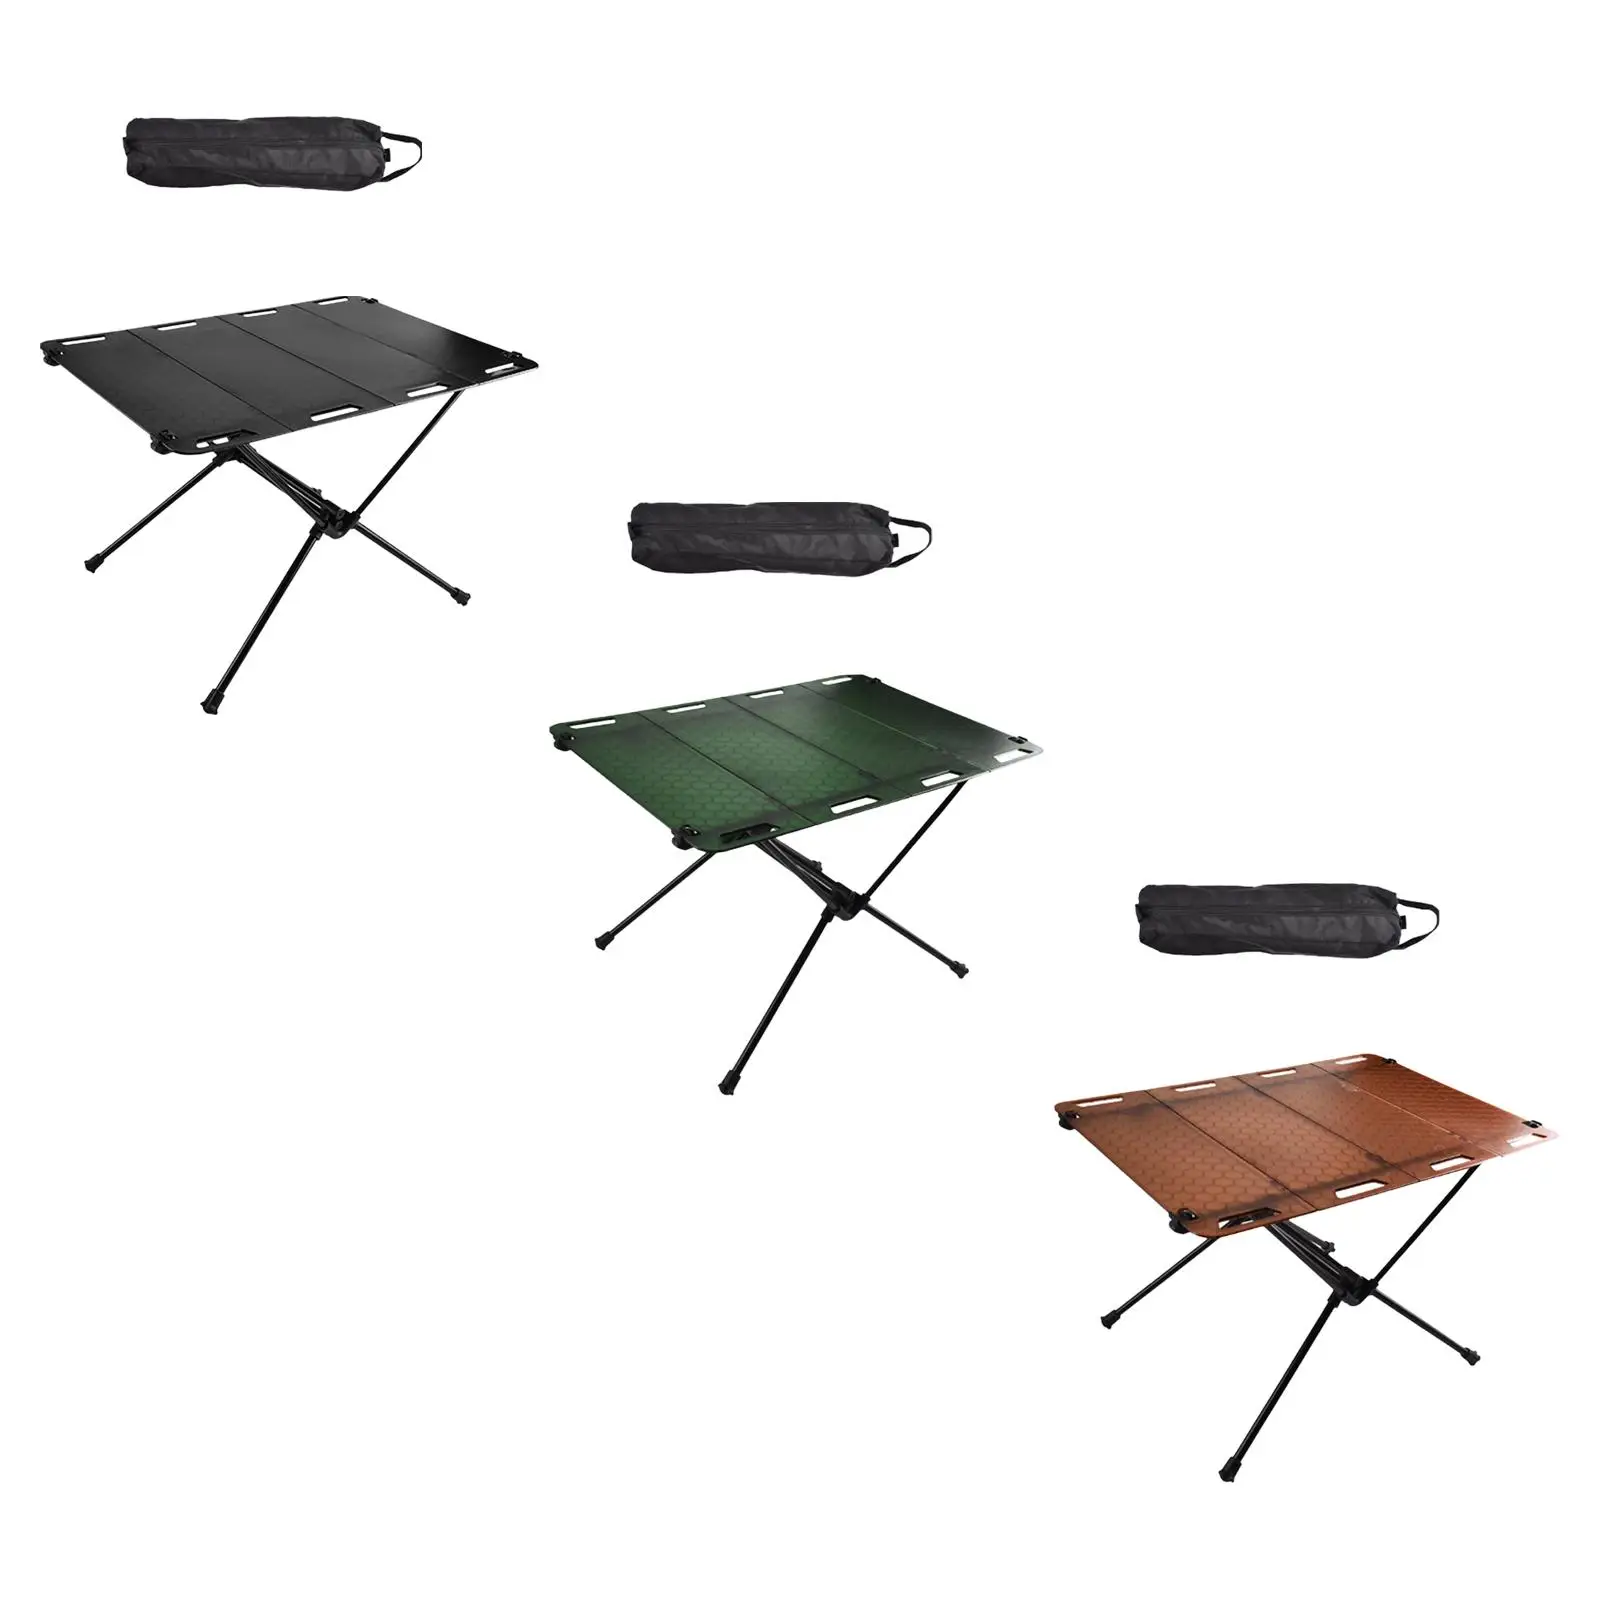 Foldable Camping Table Lightweight with Storage Bag Beach Table Camping Desk for Garden Backyard Patio Travel Hiking